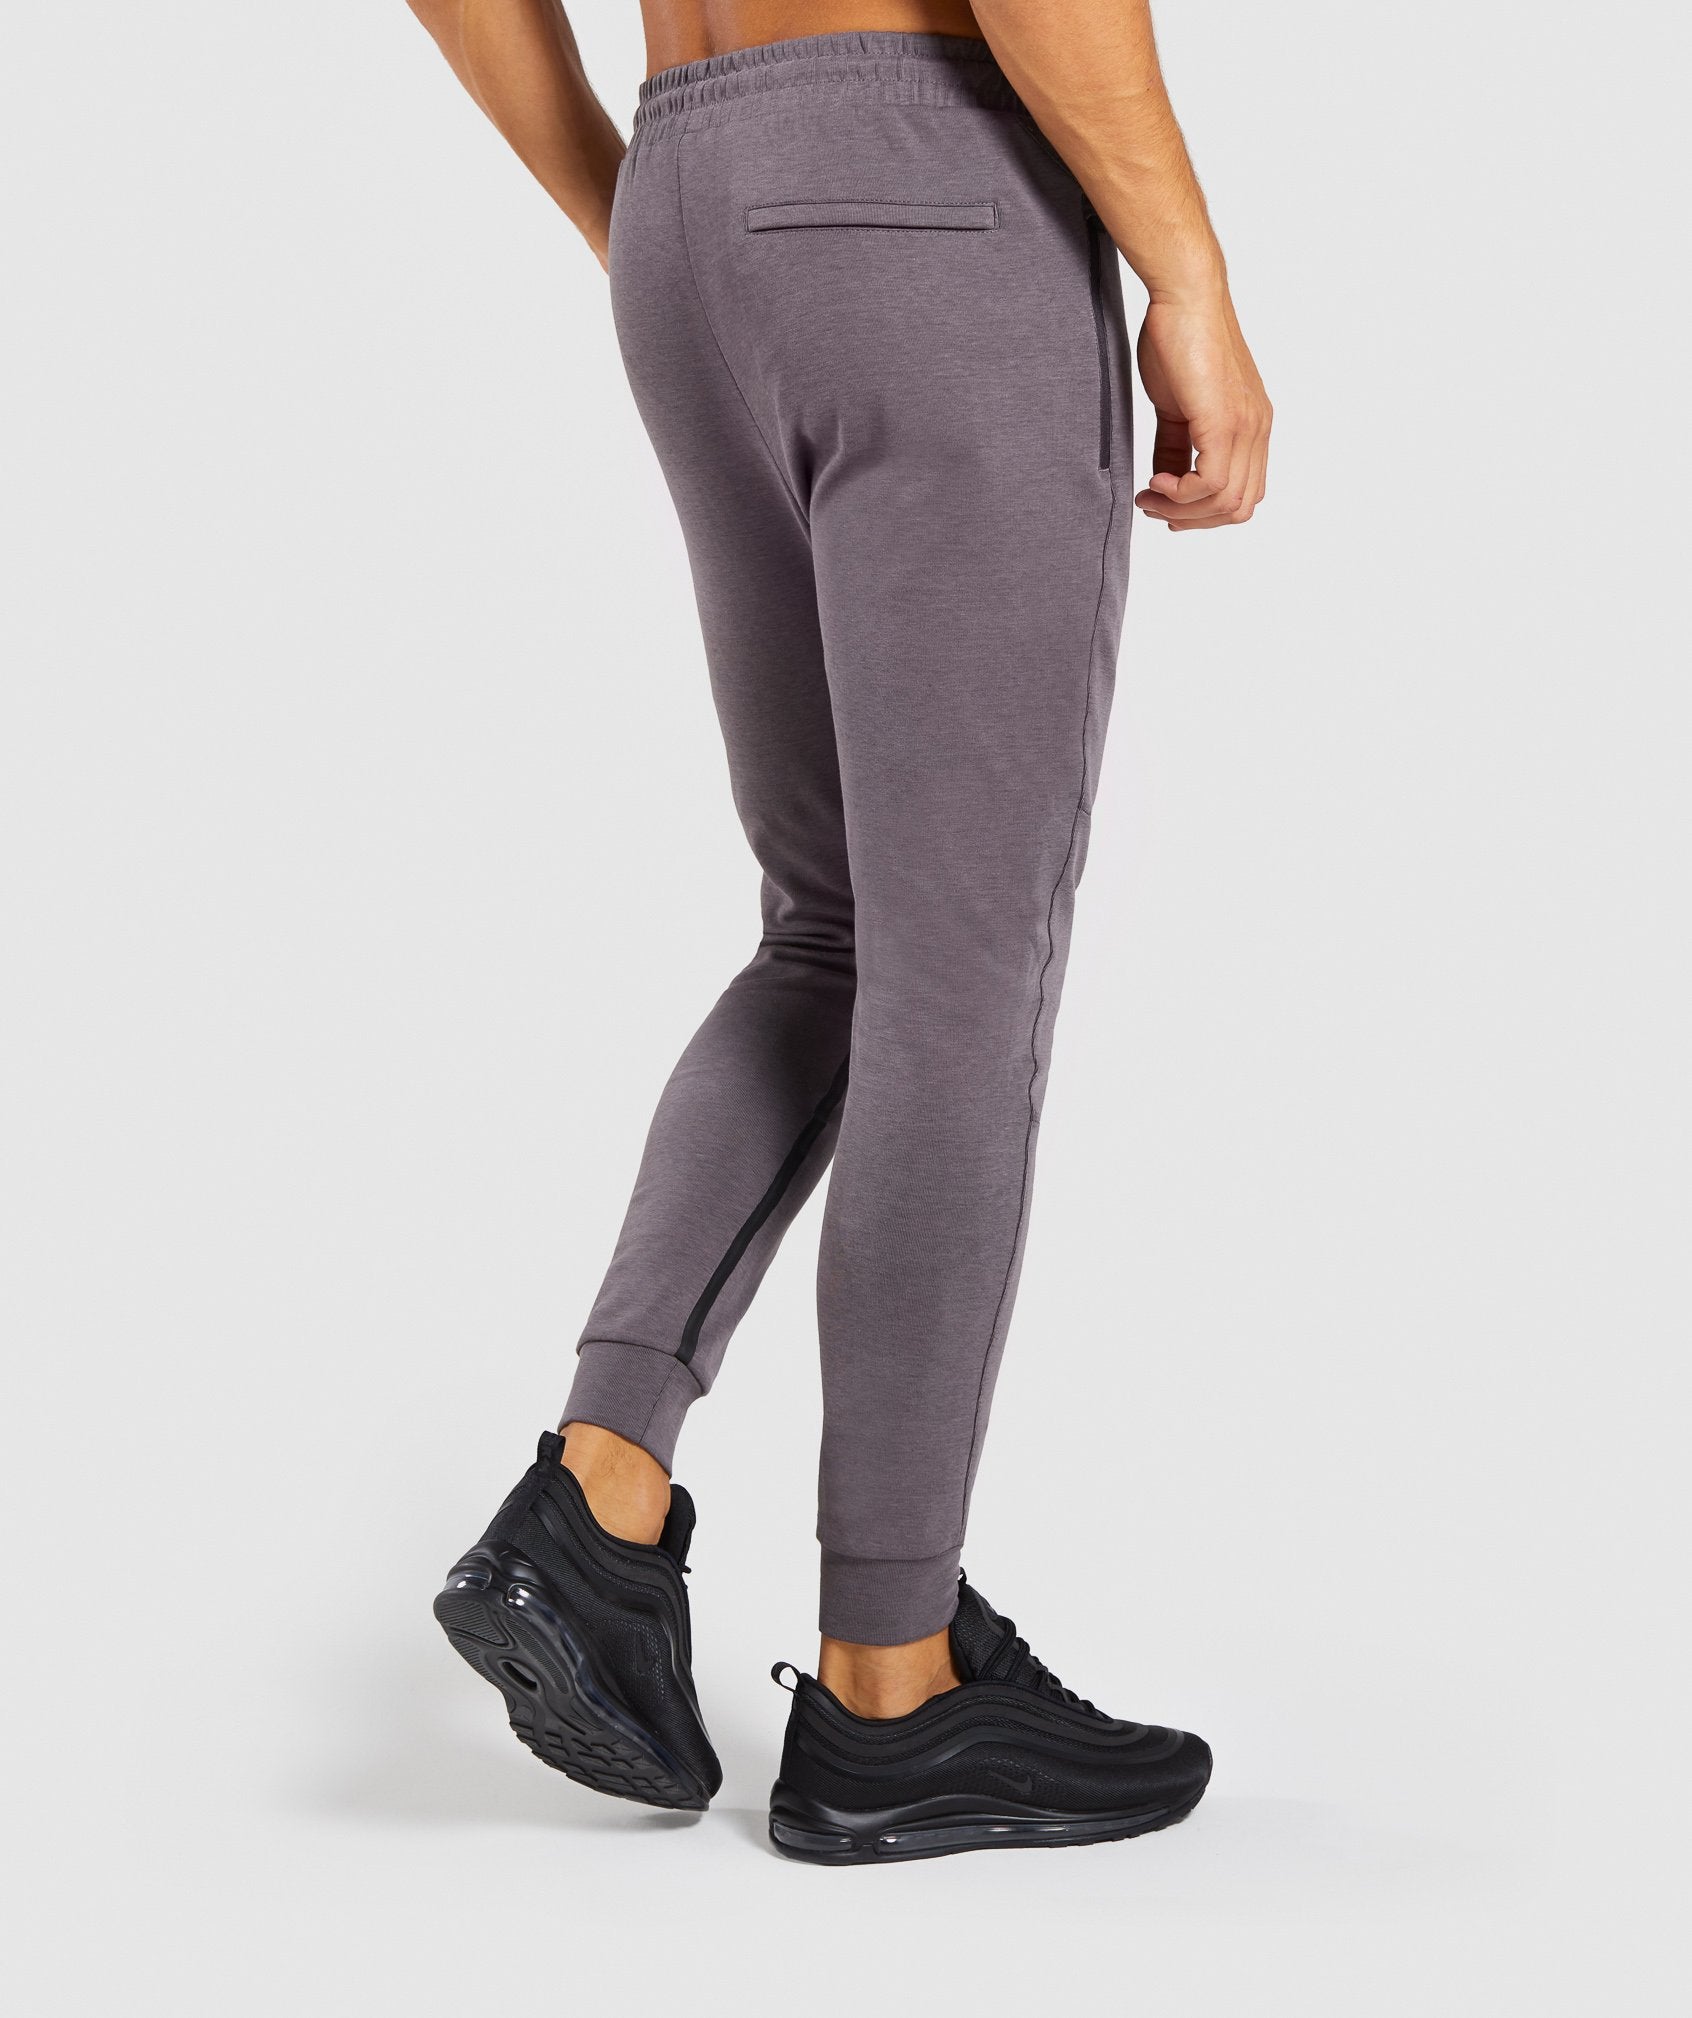 Take Over Bottoms in Slate Lavender Marl - view 2